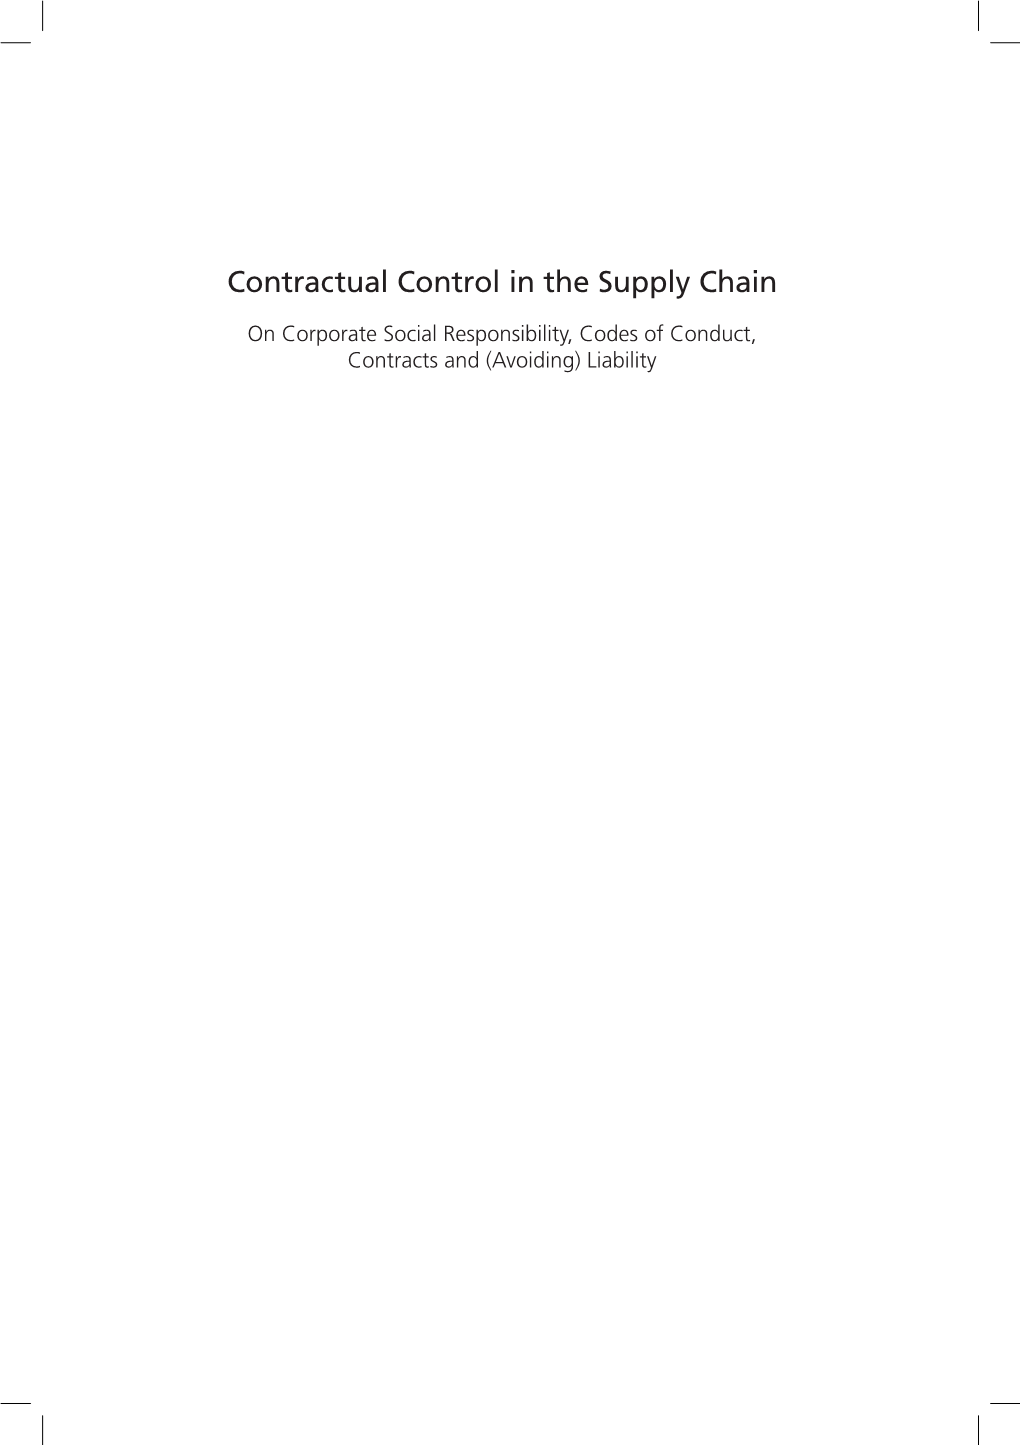 Contractual Control in the Supply Chain